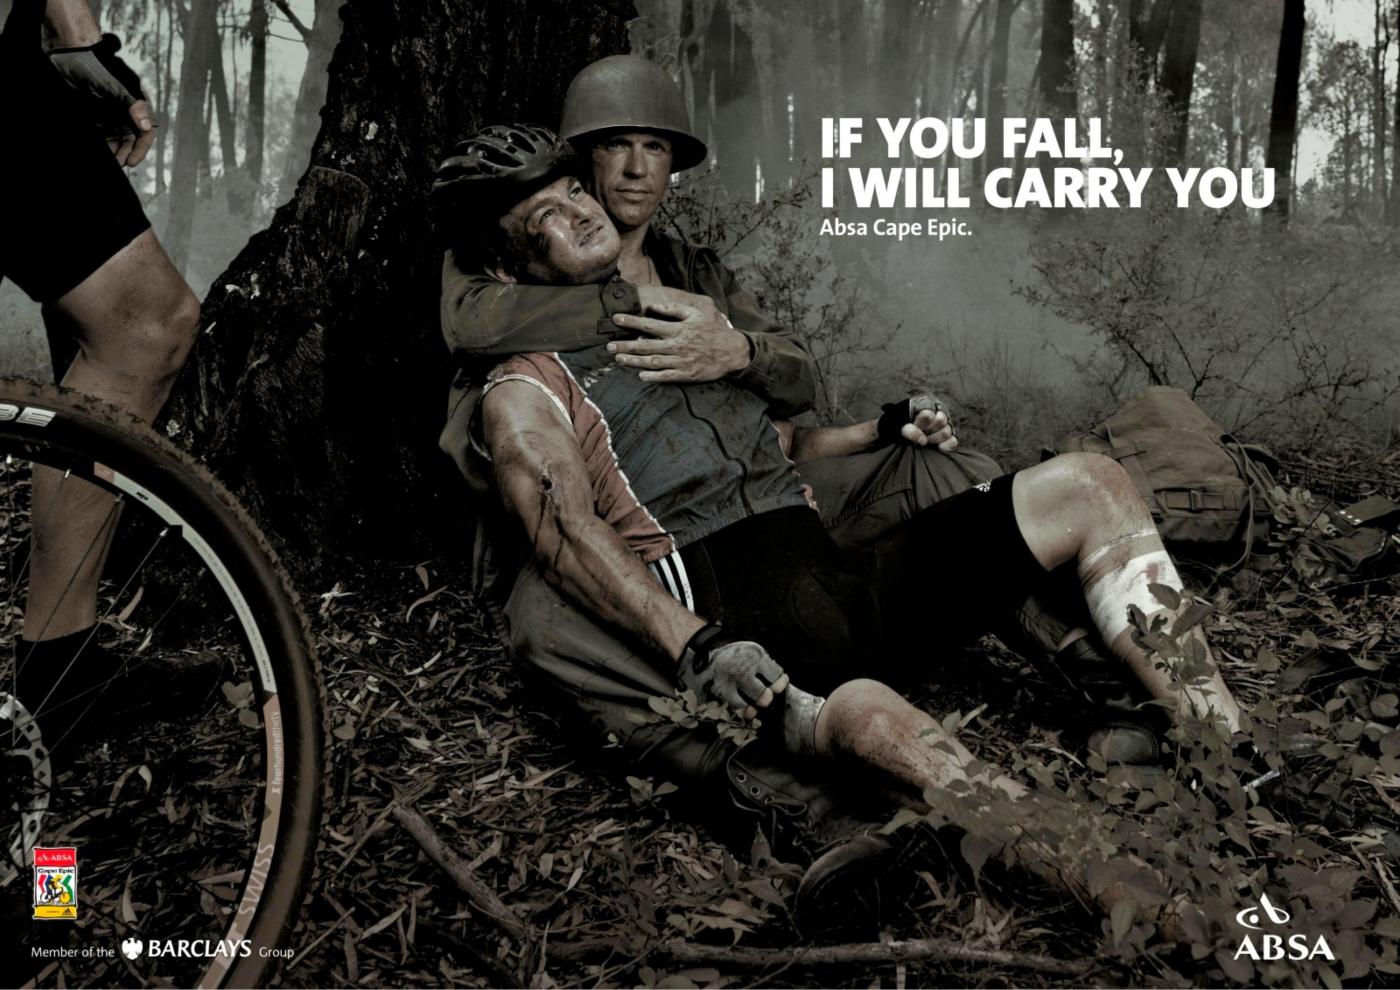 If you fall, I will carry you